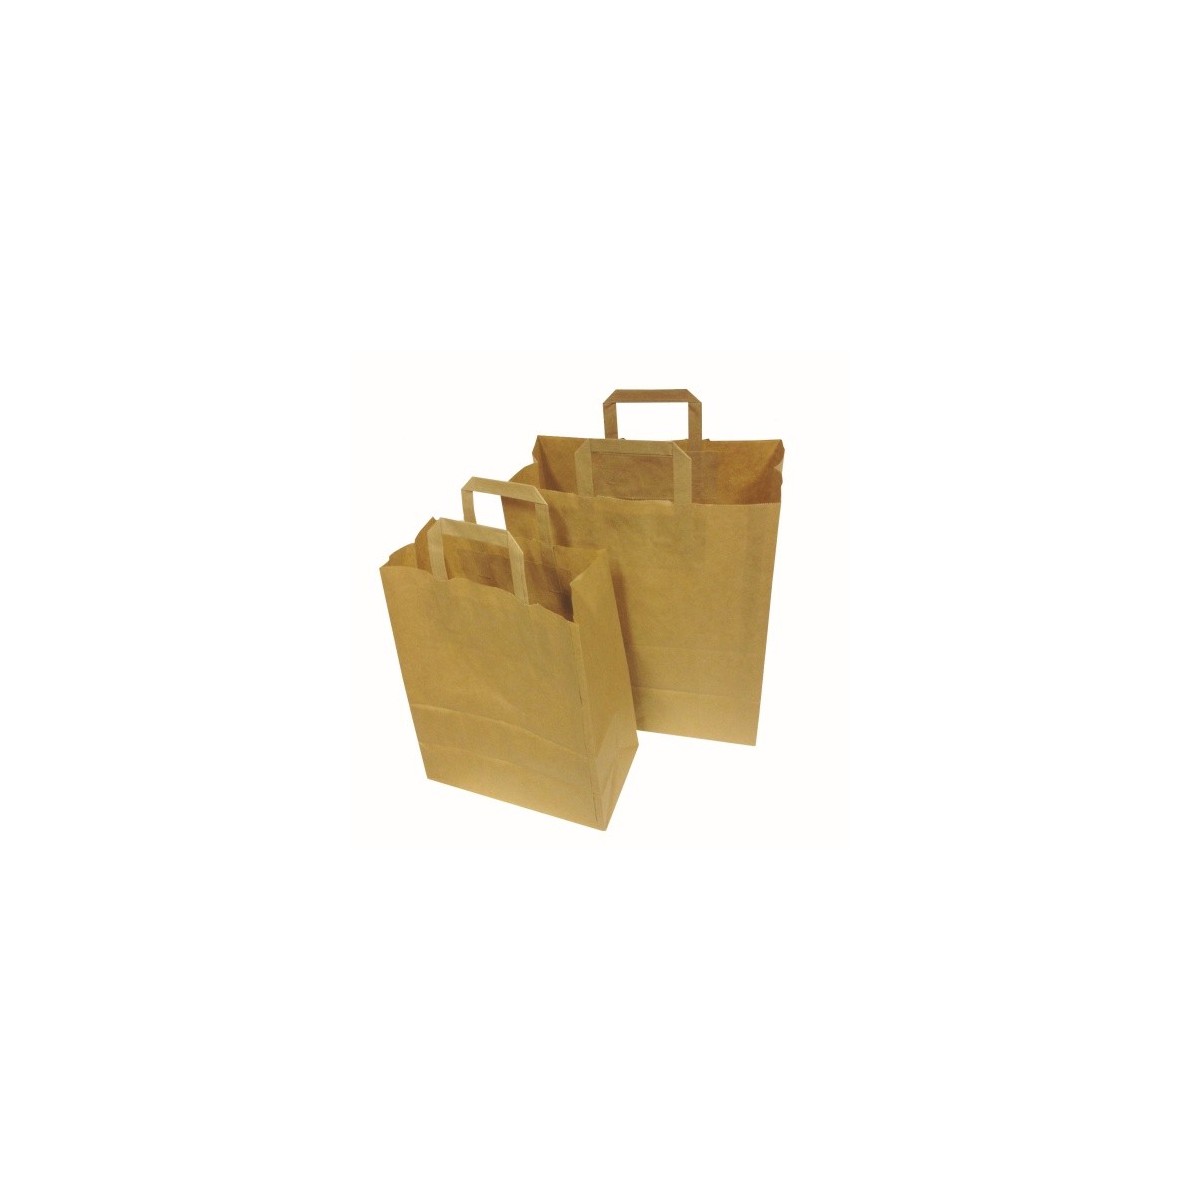 BROWN KRAFT PAPER BAG 26 X14 X 33CM SMALL 50 PIECES FOST+2020 INCL. 0,10098 €  PACKAGE